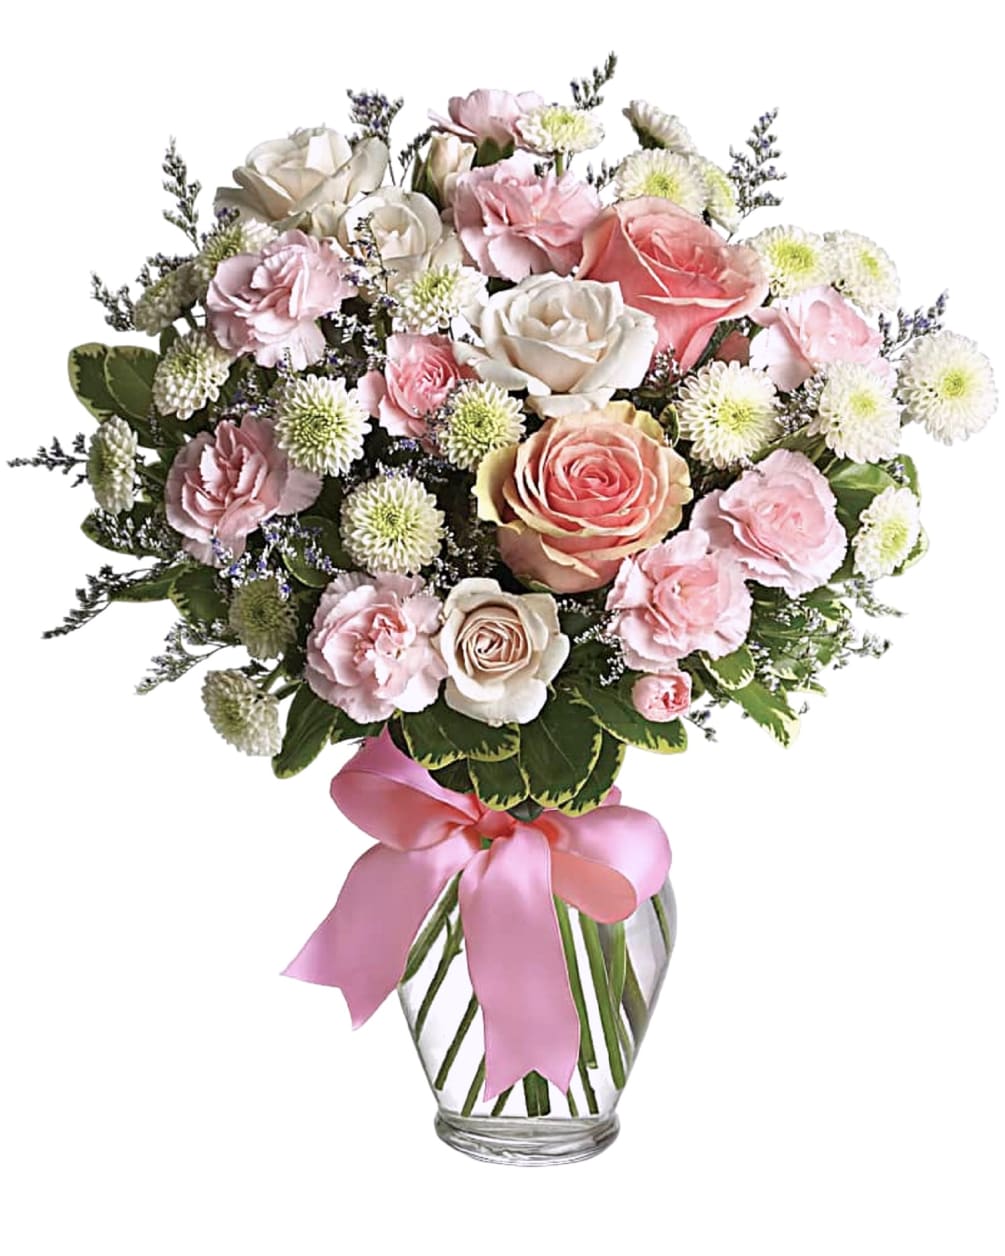 Sweet as candy! This soft pink and white bouquet is a feminine